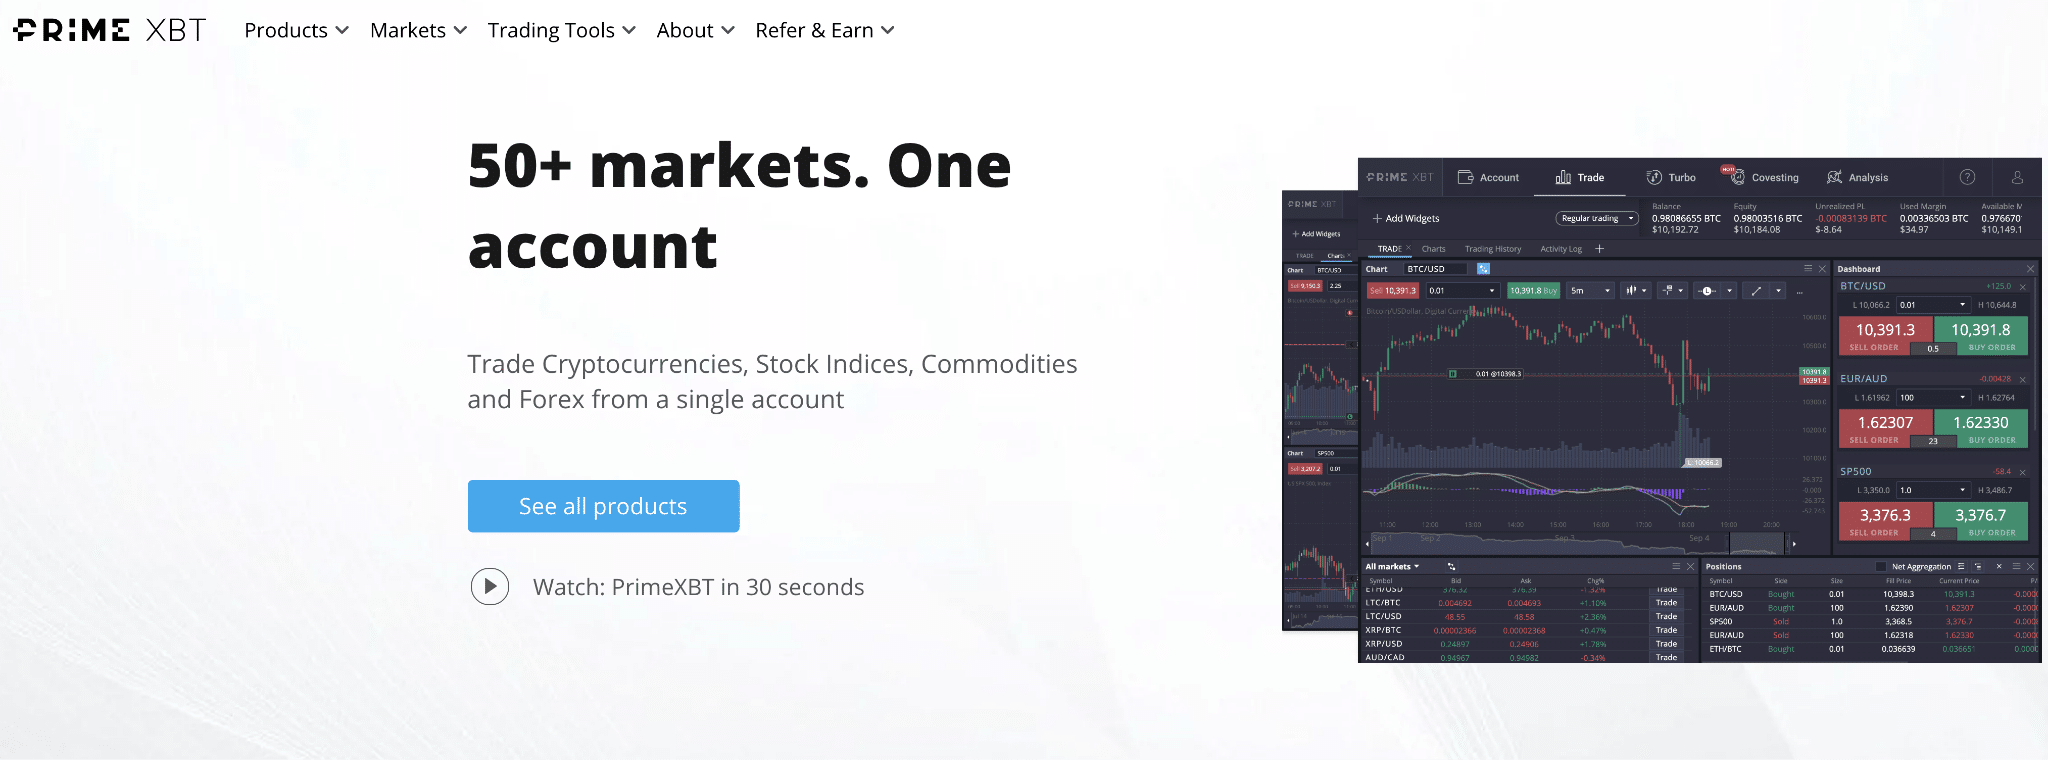 PrimeXBT : Everything You Need to Know About Bitcoin Trading Platform